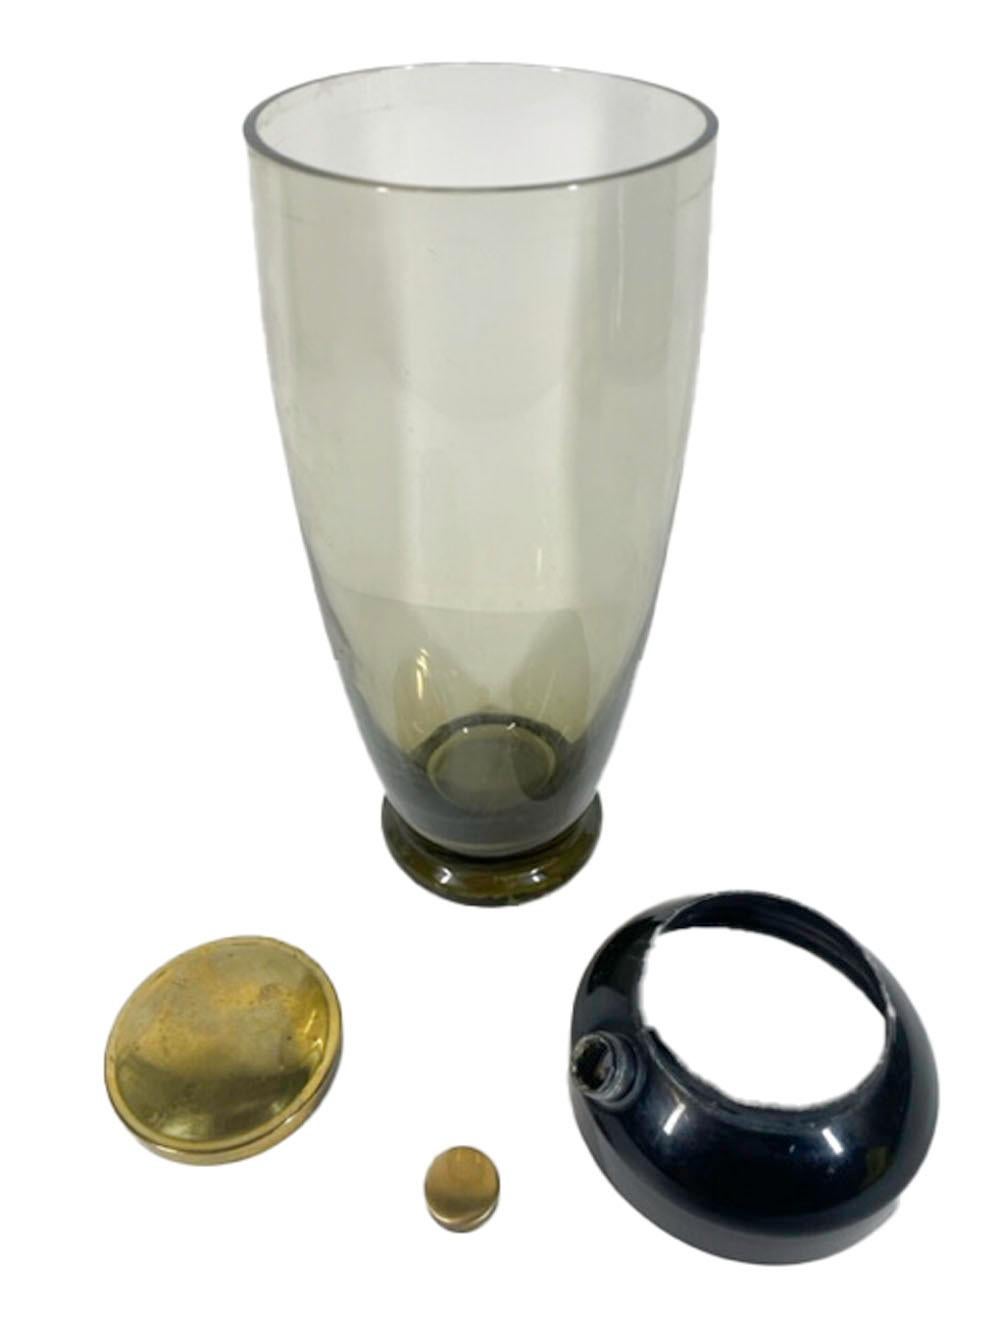 American Art Deco Cocktail Shaker, Pale Olive Glass, Black Enameled Lid w/Brass Caps For Sale